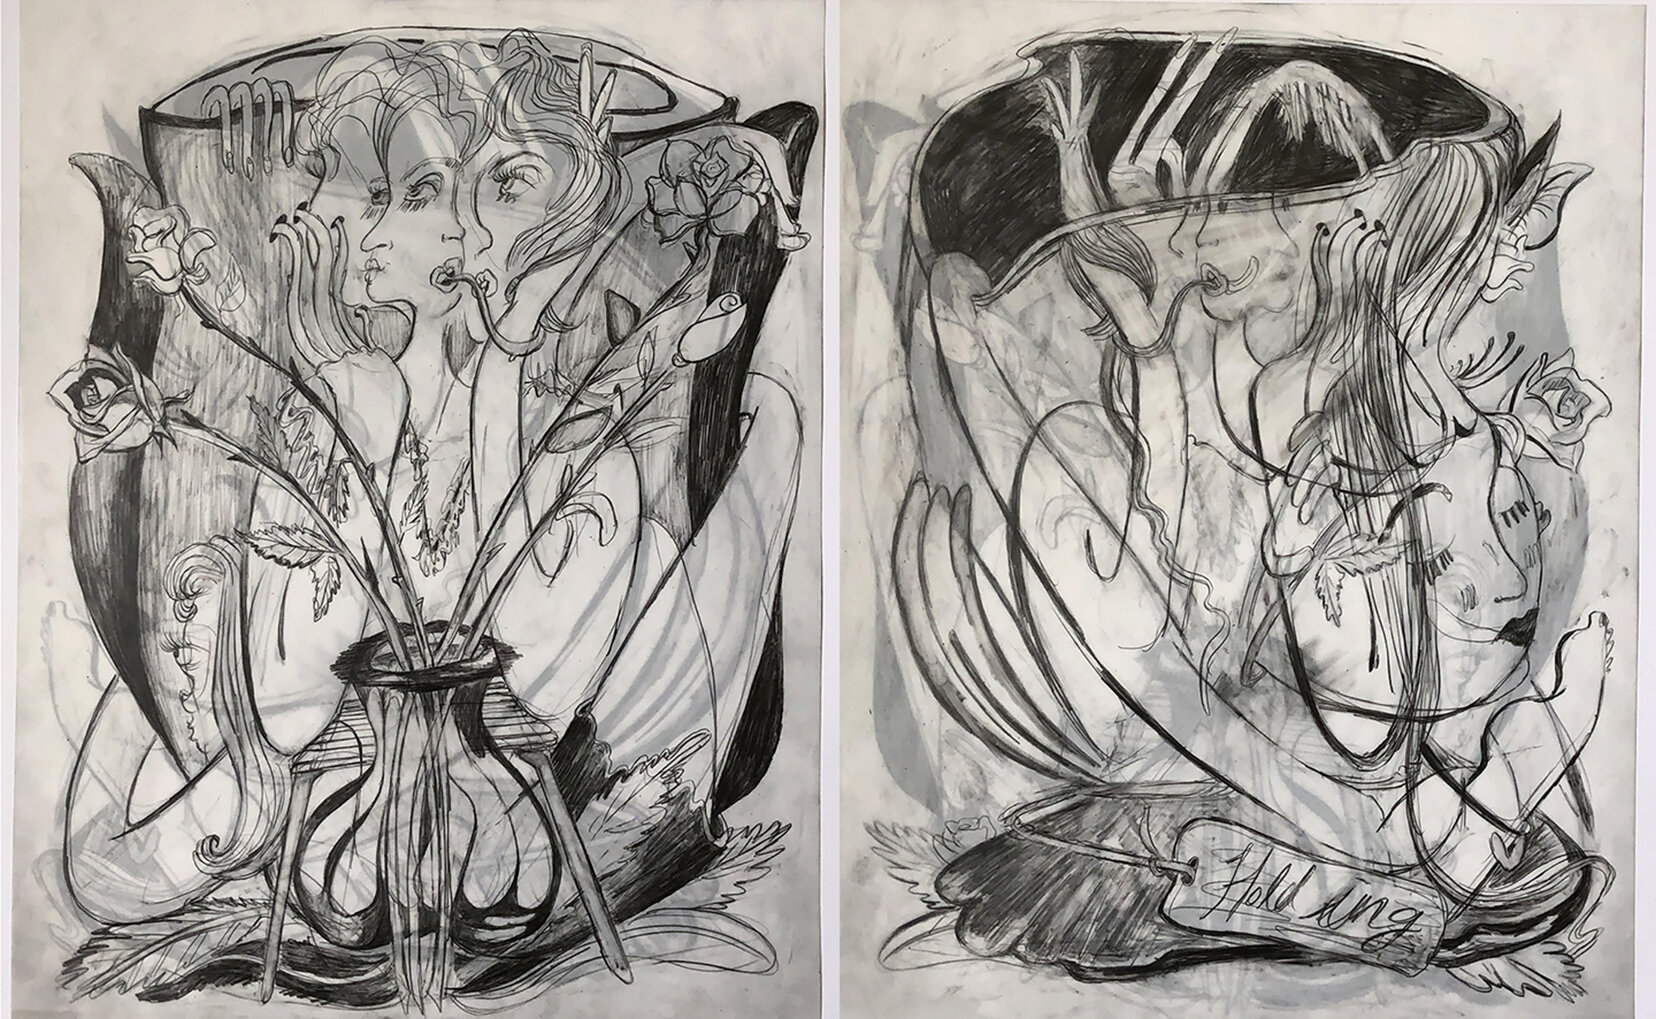   Flowereaters/ Holed in Head,  2020, graphite on translucent Yupo paper (front-and-back drawings), 11 x 14 inches 